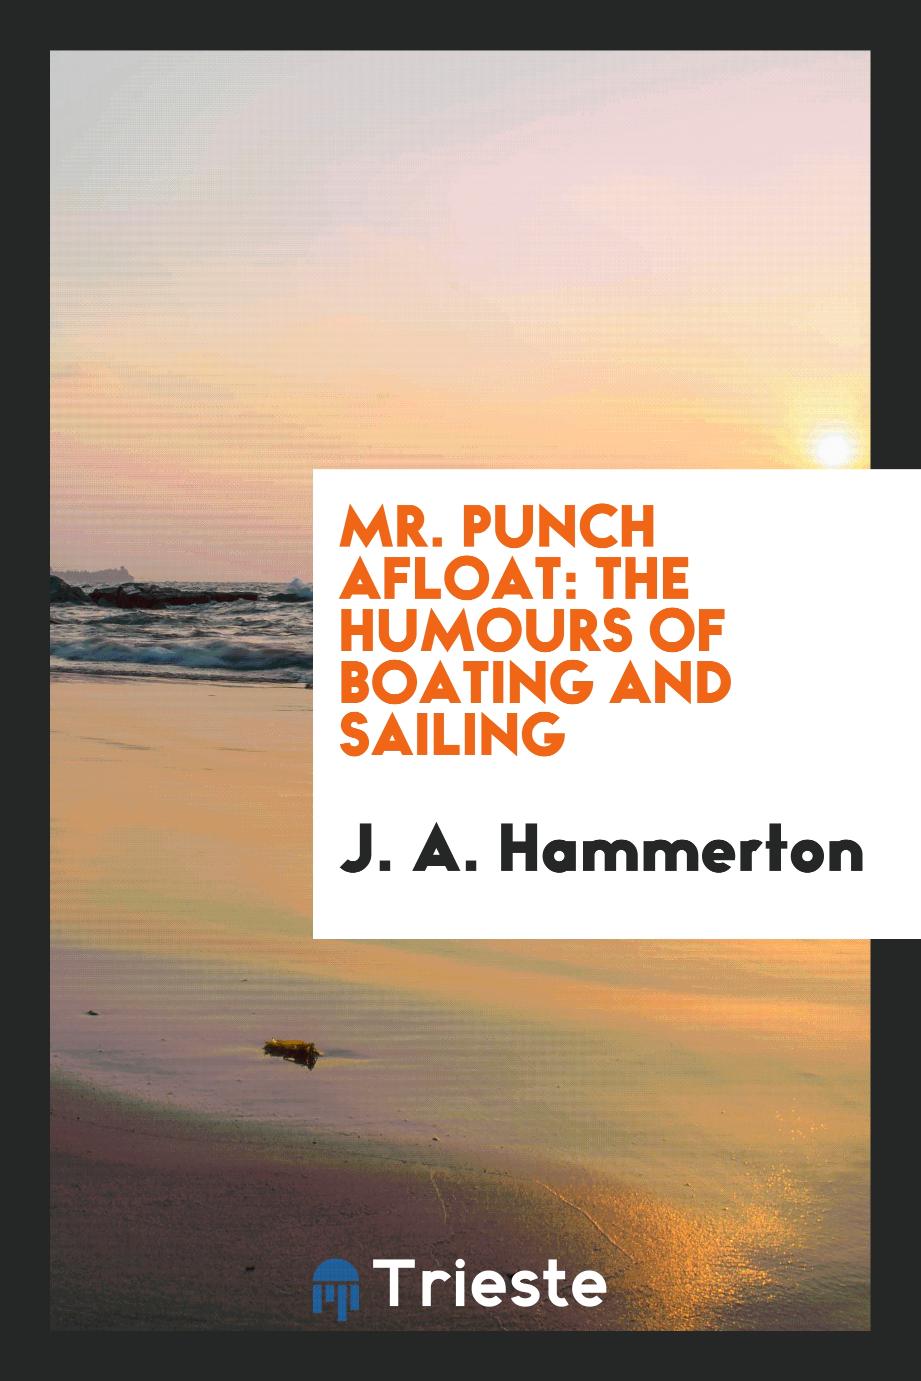 Mr. Punch afloat: the humours of boating and sailing